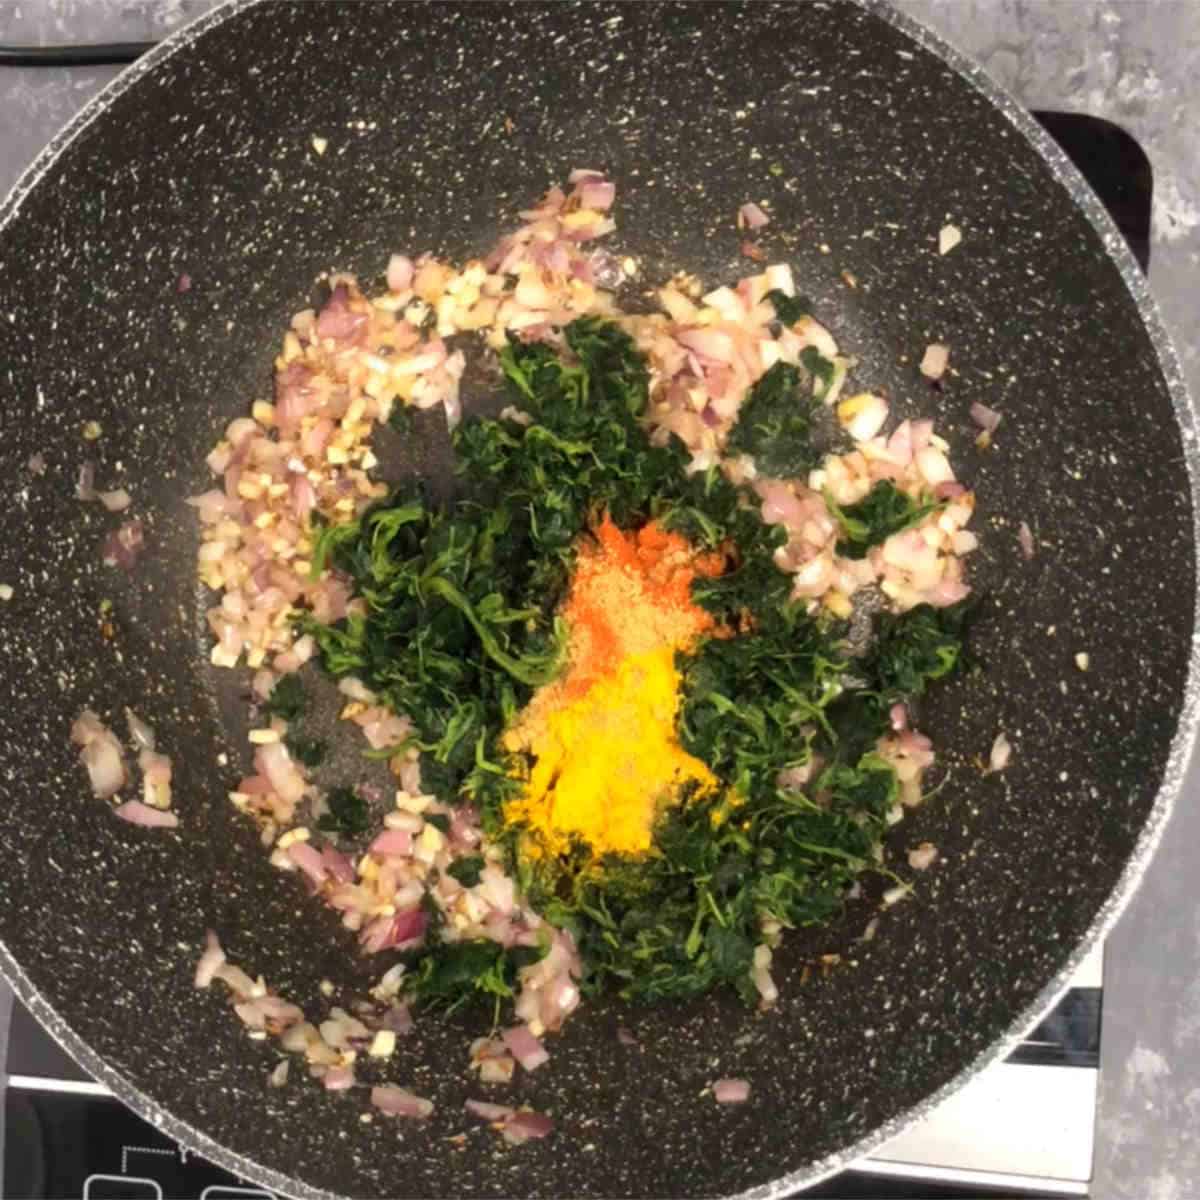 Add spinach and spices to sauteed onions.